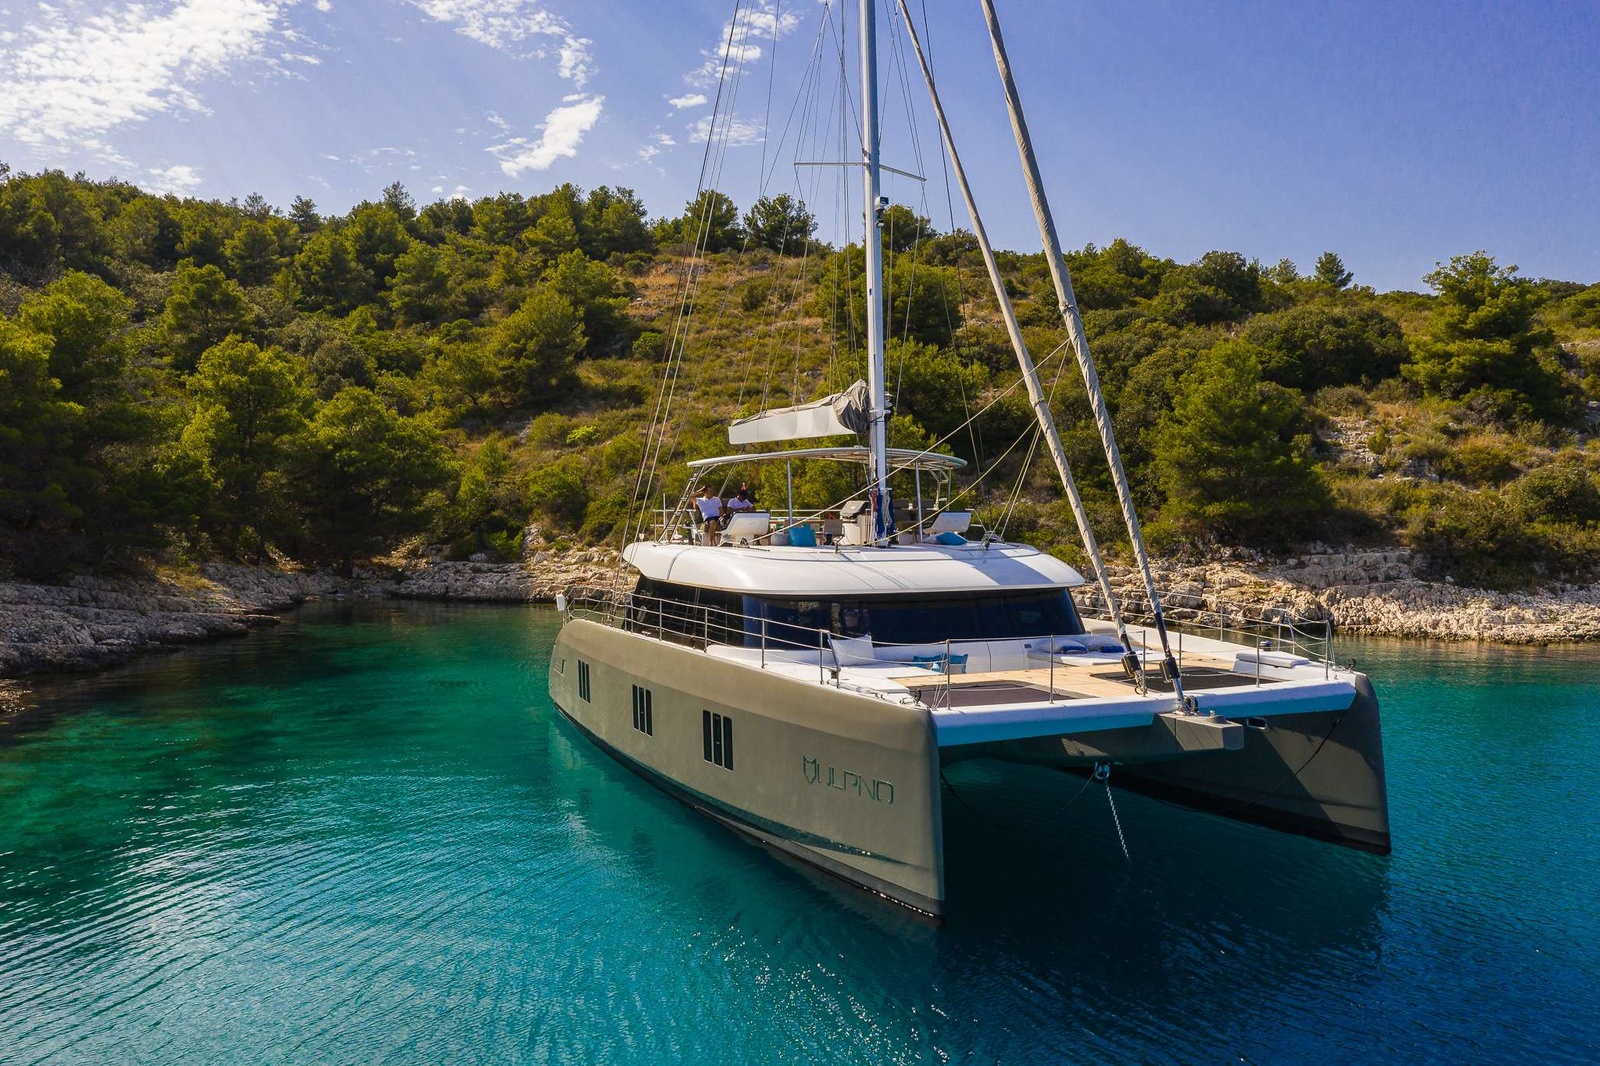 A 2020 launch, the brand new luxury sailing catamaran Sunreef 60 VULPINO has just joined the Croatia charter fleet. This stunning yacht not only features a smart and charter-friendly layout but boasts some impressive social areas at the bow, stern cockpit and flybridge. Whether you are vacationing with your family or want to reunite with your friends this spacious and powerful catamaran is hard to beat. 

Sunreef 60  VULPINO  comfortably accommodates 8 guests in the opulent master suite with a walk-in closet and 3 spacious elegant guest cabins all ensuite, with separate cabins for crew. In each cabin, there is A/C unit with individual controls, plugs, adaptors, 4 pillows, quilt and complimentary bottled water. At every bathroom, guests will find bath towels, hand towels, cosmetic tissues, hair dryer, complimentary L’occitane toiletry. The cockpit is stocked with beach towels and complimentary sunscreen lotion. The VULPINO is available in Croatia from May 2020 from Split, and as the optional pick-up/pick off port Dubrovnik.

The crew of three (captain, chef & stewardess), all trained professional with experience in their fields, will make You feel like you are on your own yacht and make sure you have the privacy but still be catered to.
